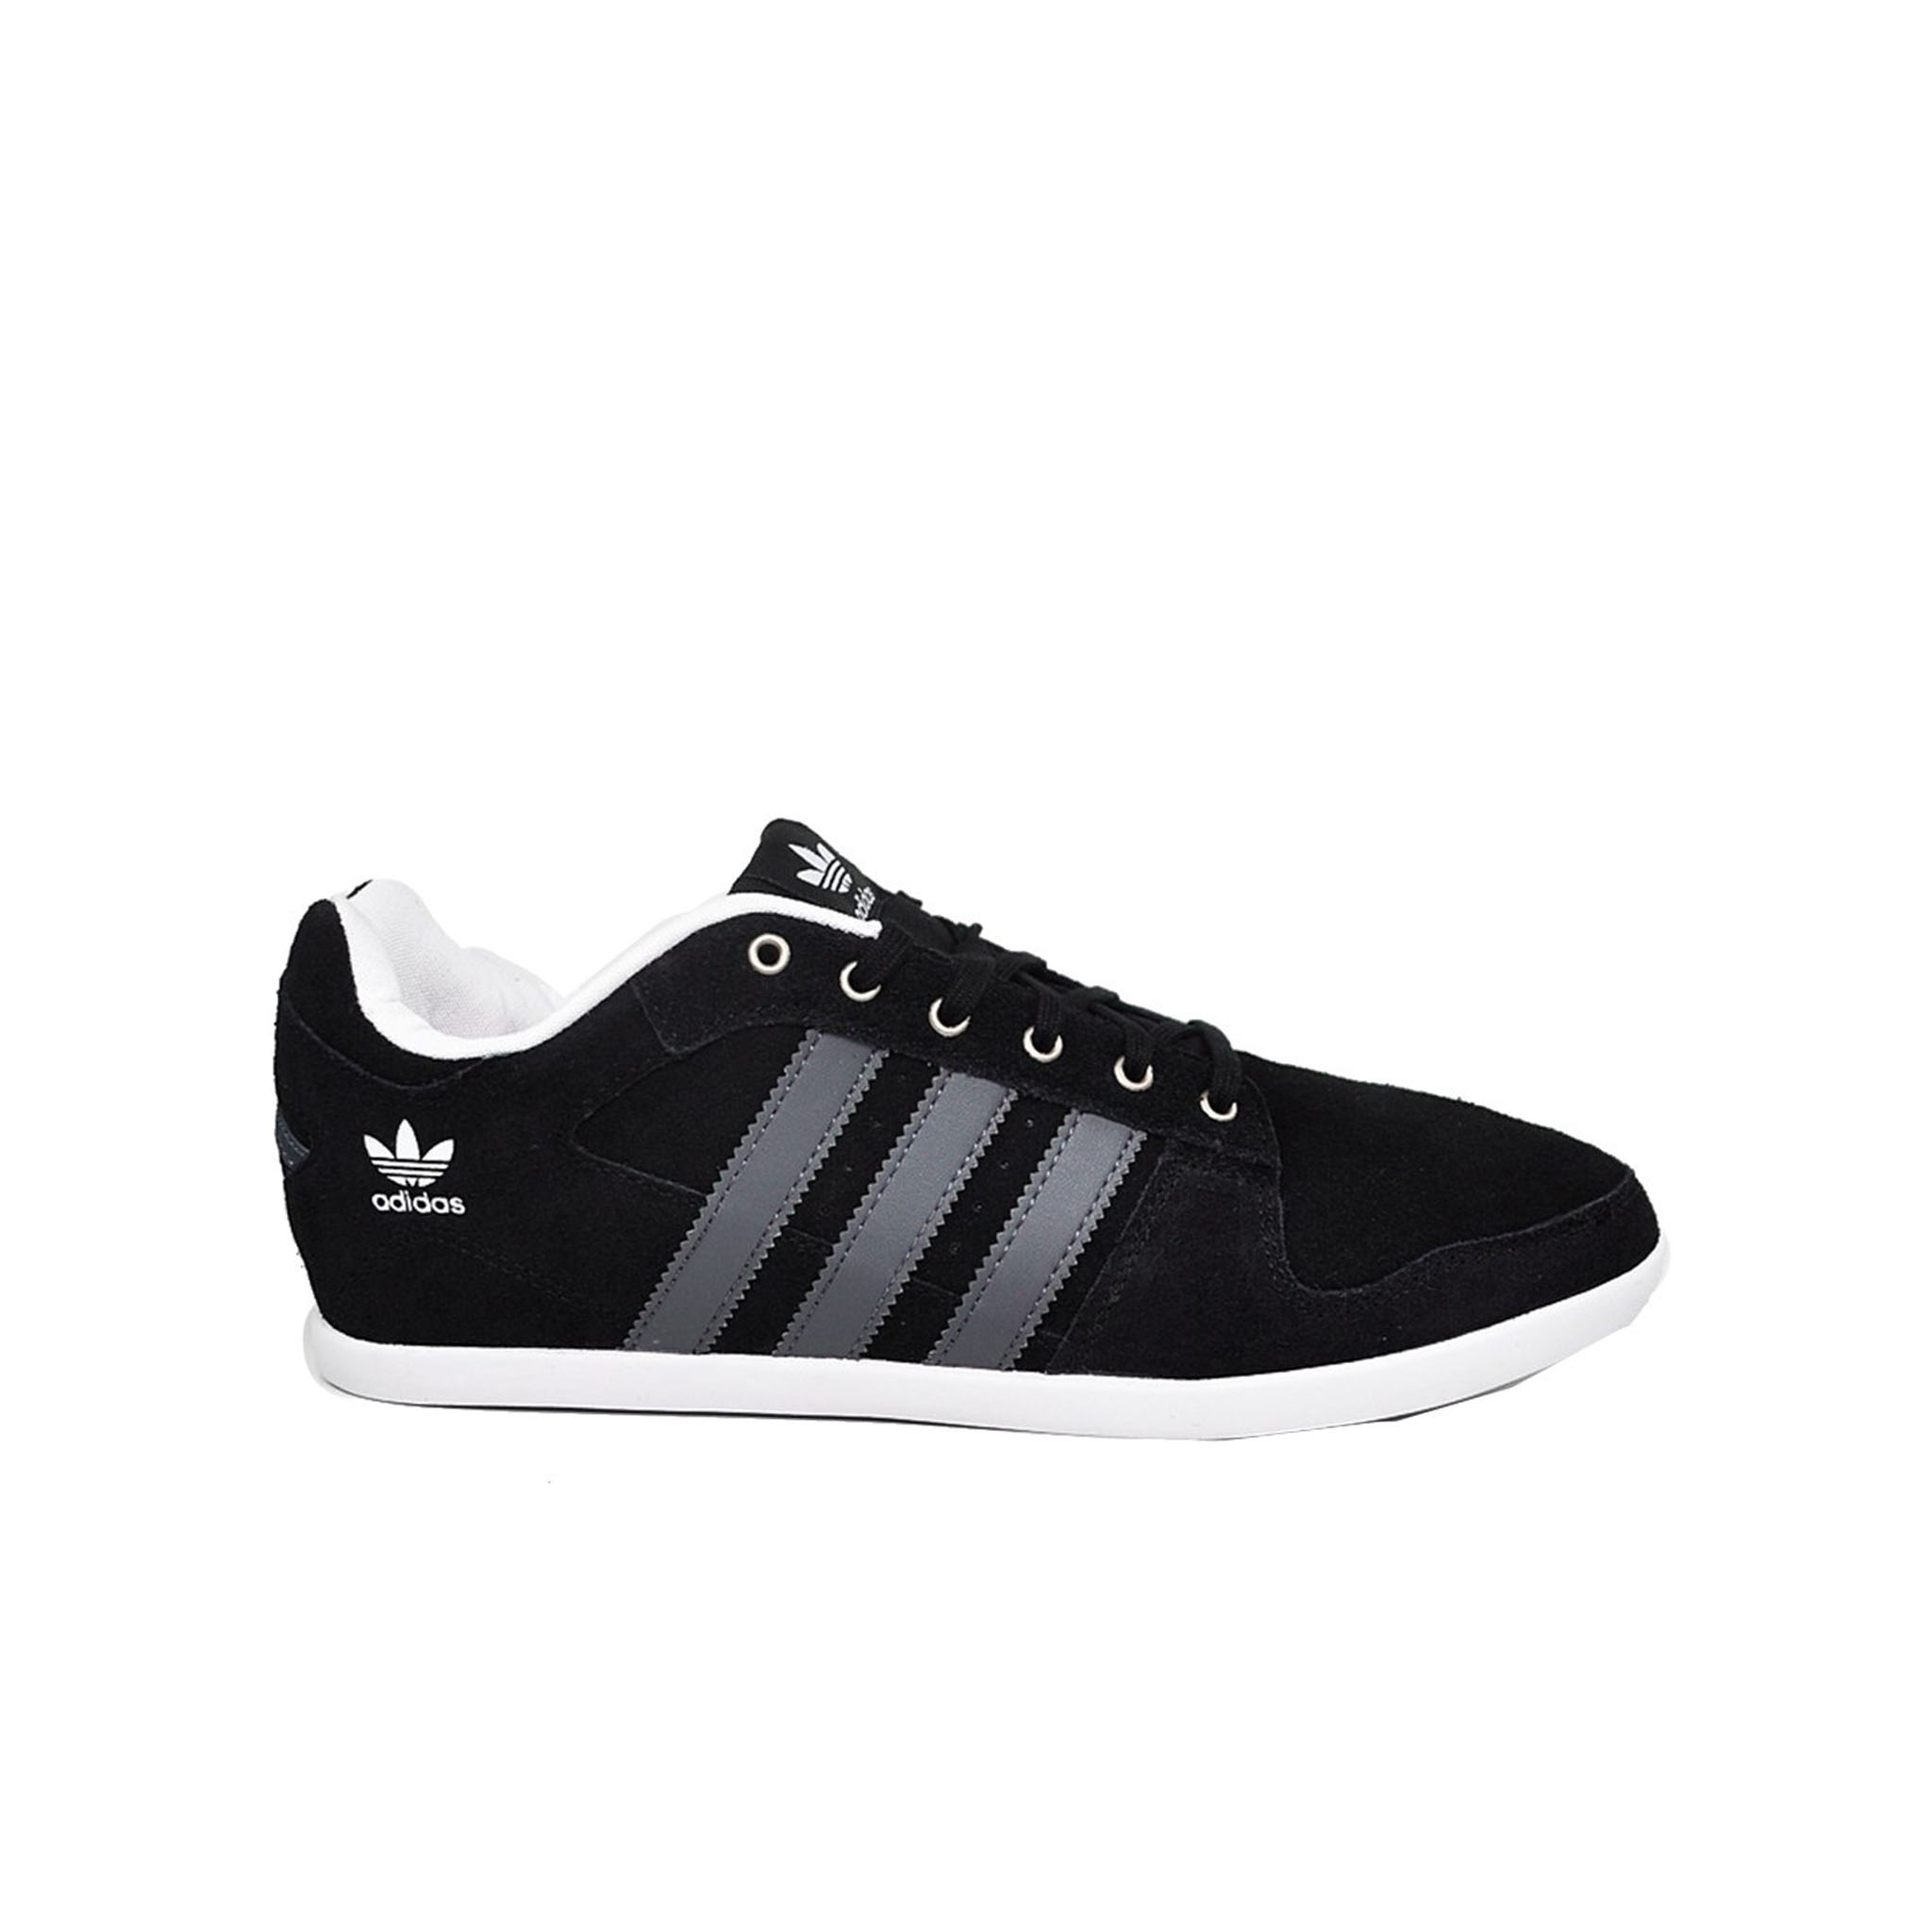 Adidas Plimcana Black Suede Leather Mens Trainers B44001